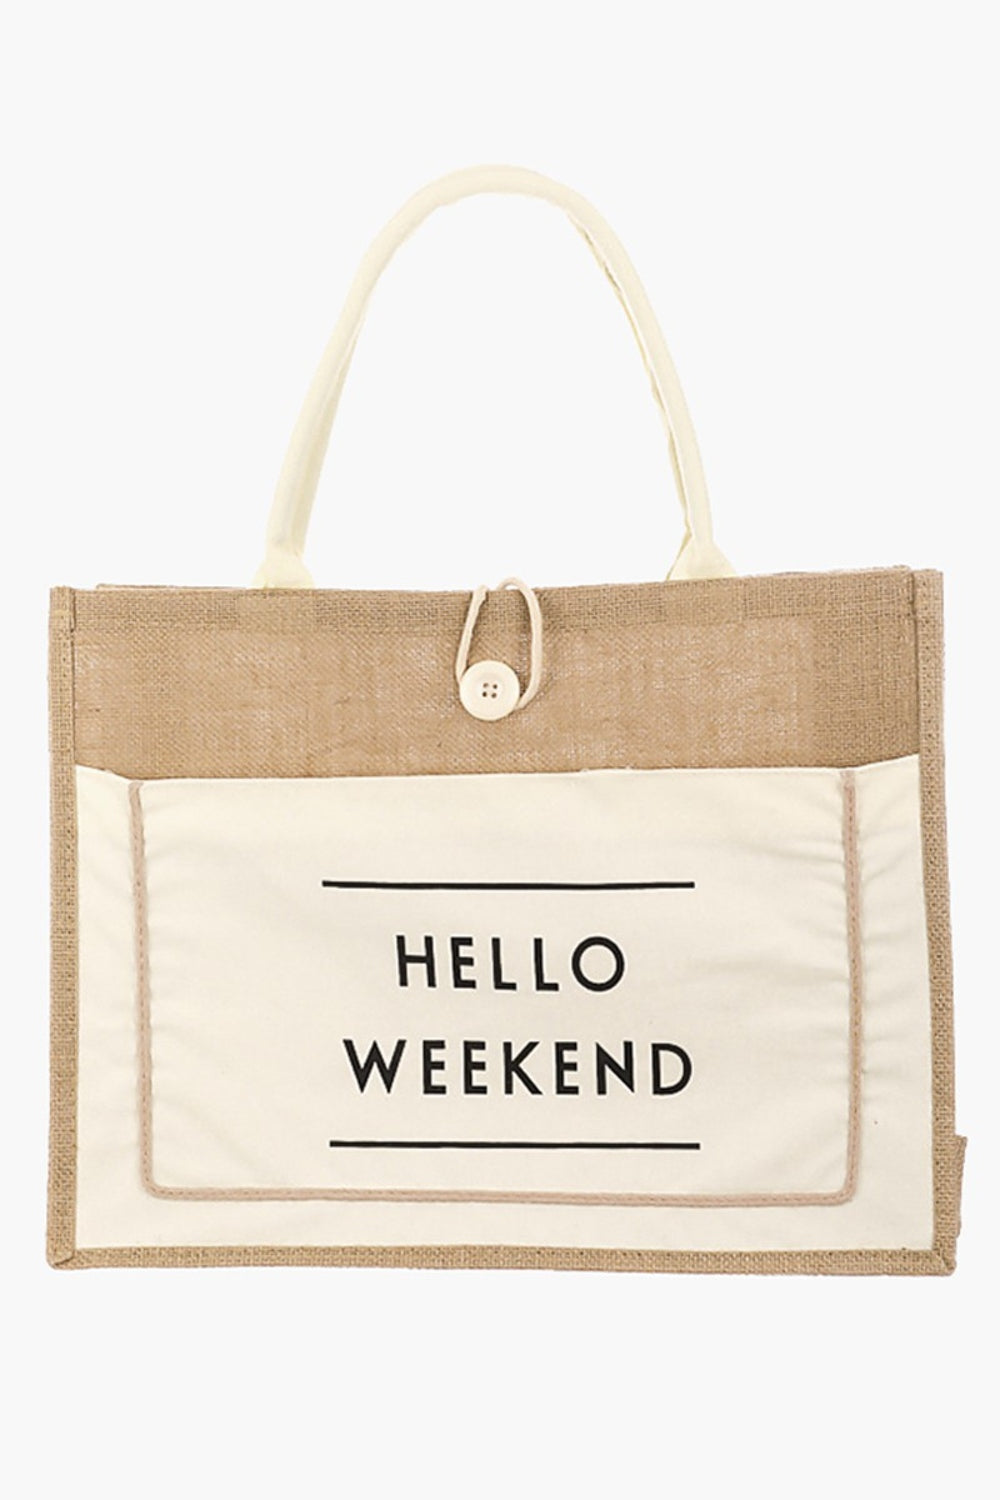 Hello Weekend Large Burlap Tote Bag Southern Soul Collectives